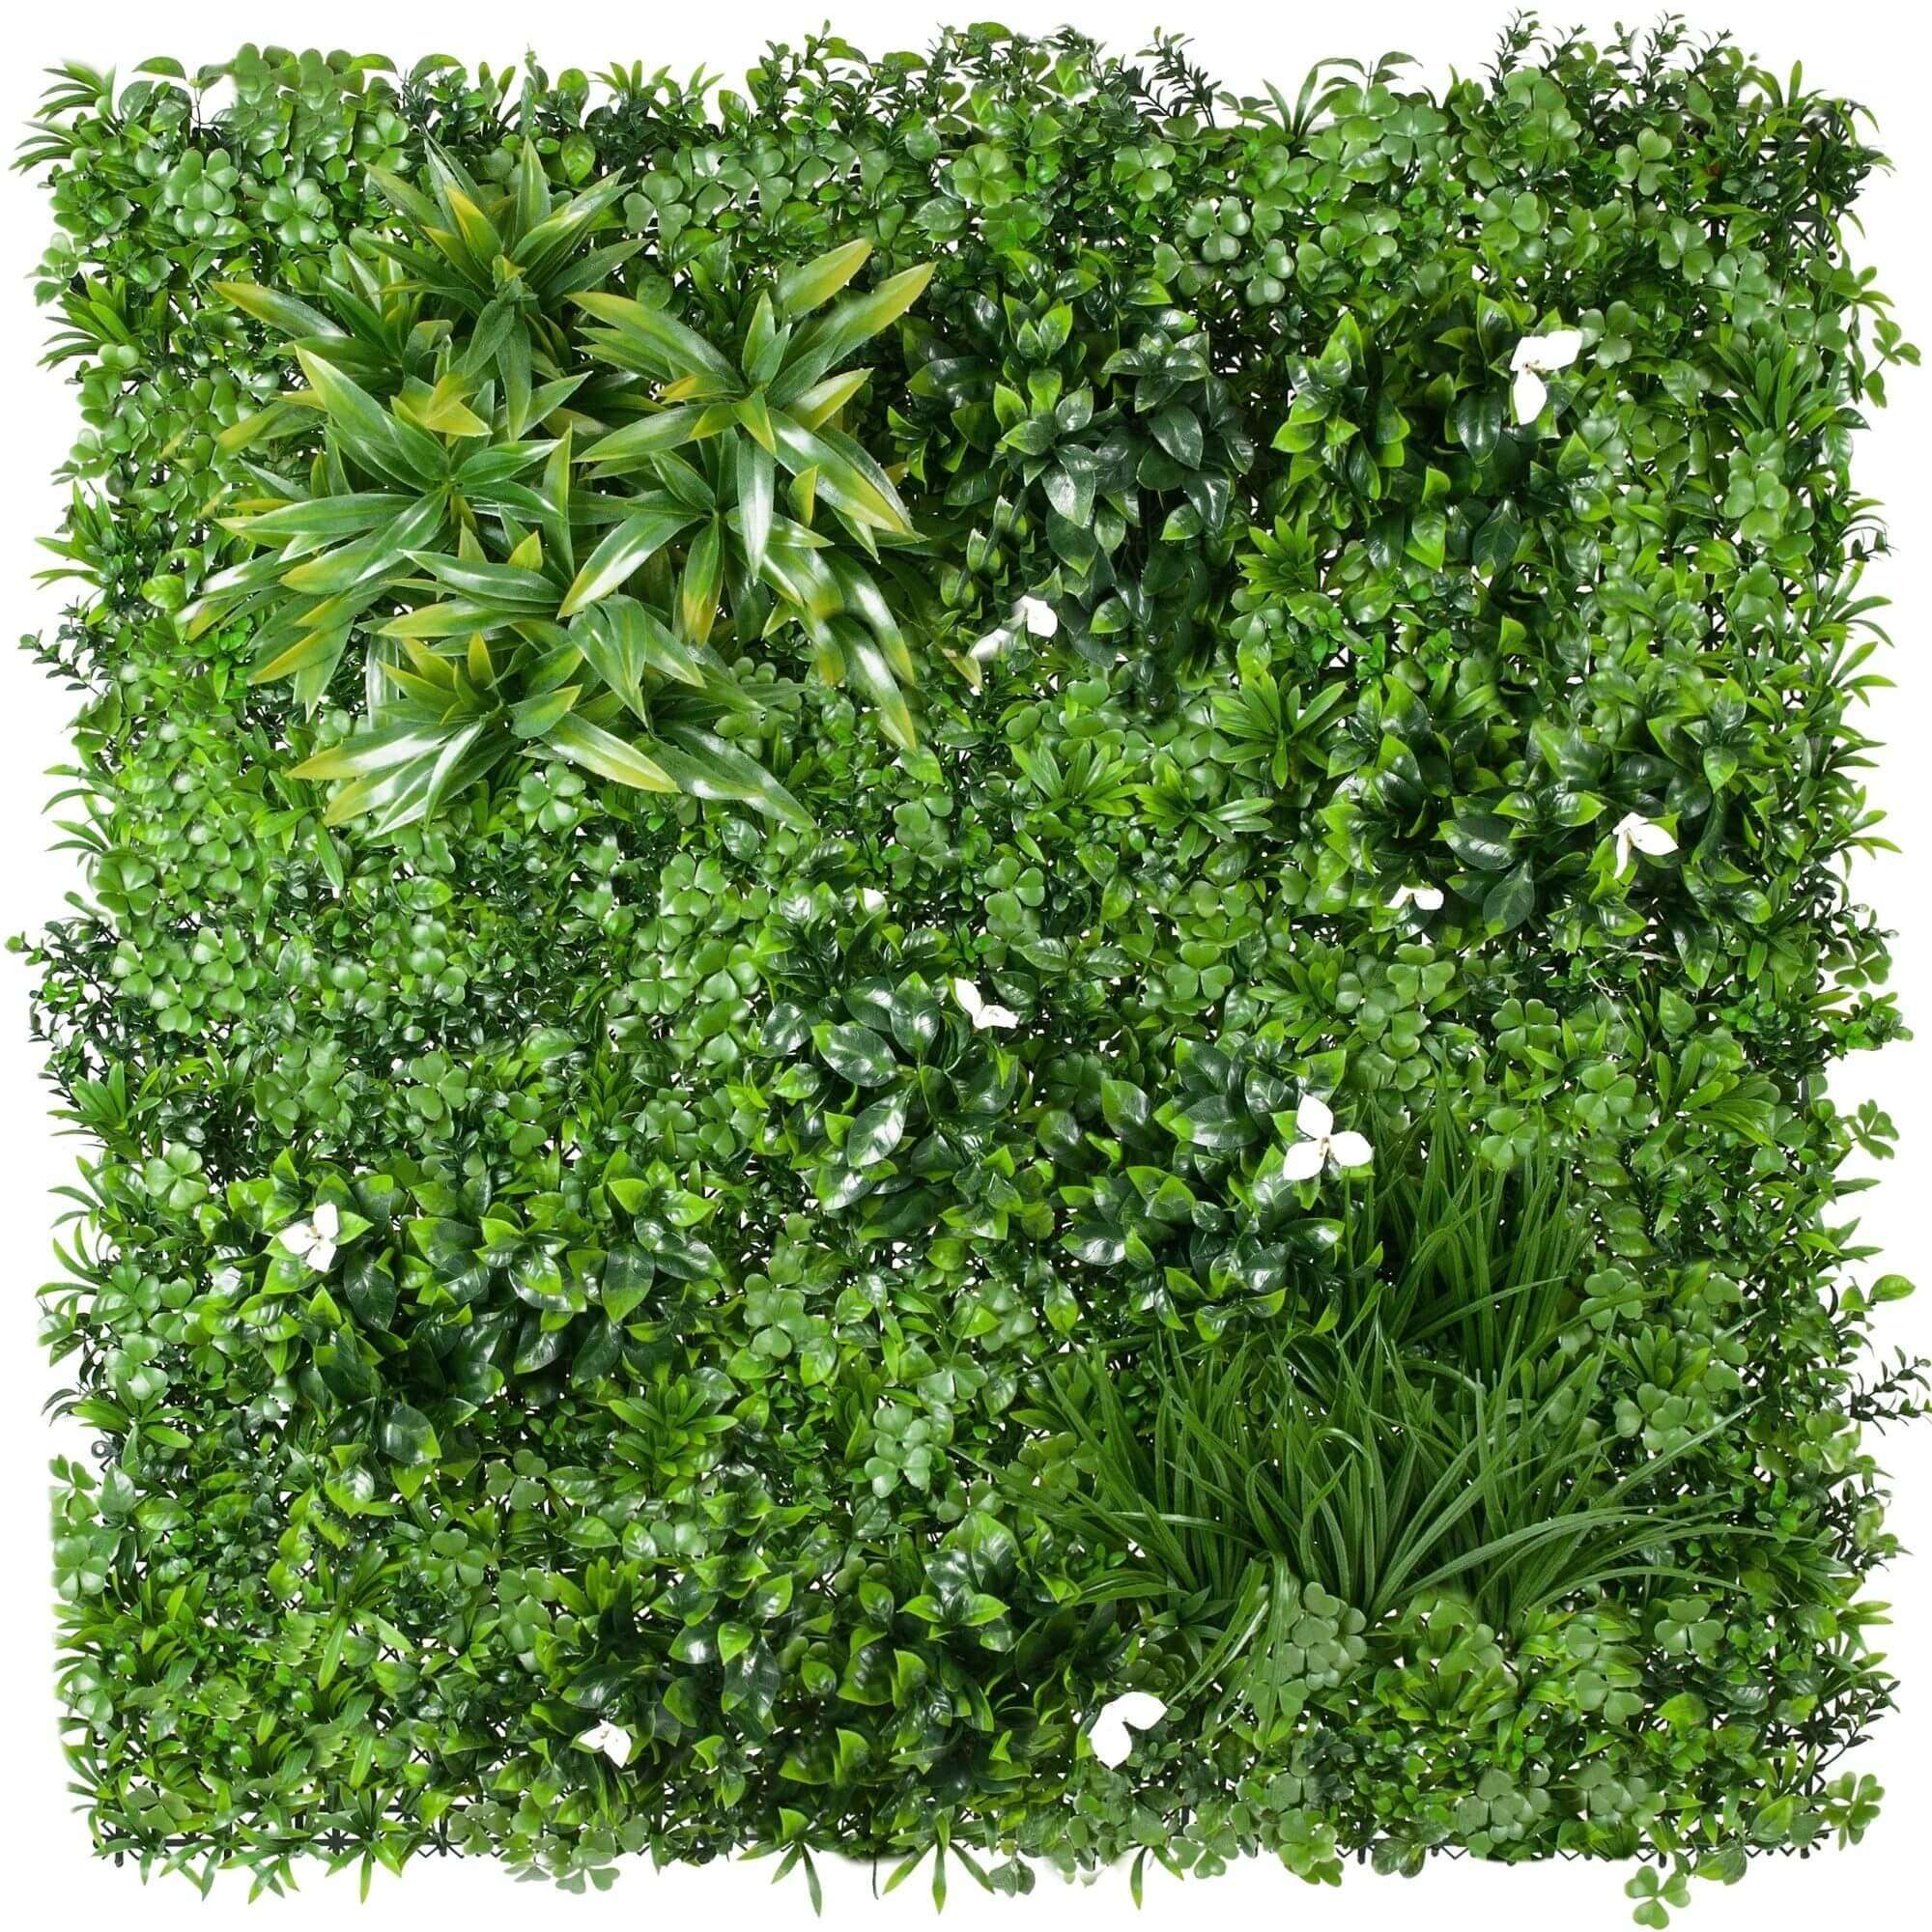 white-lily-artificial-vertical-garden-fake-green-wall-1m-x-1m-uv-resistant-816387.jpg